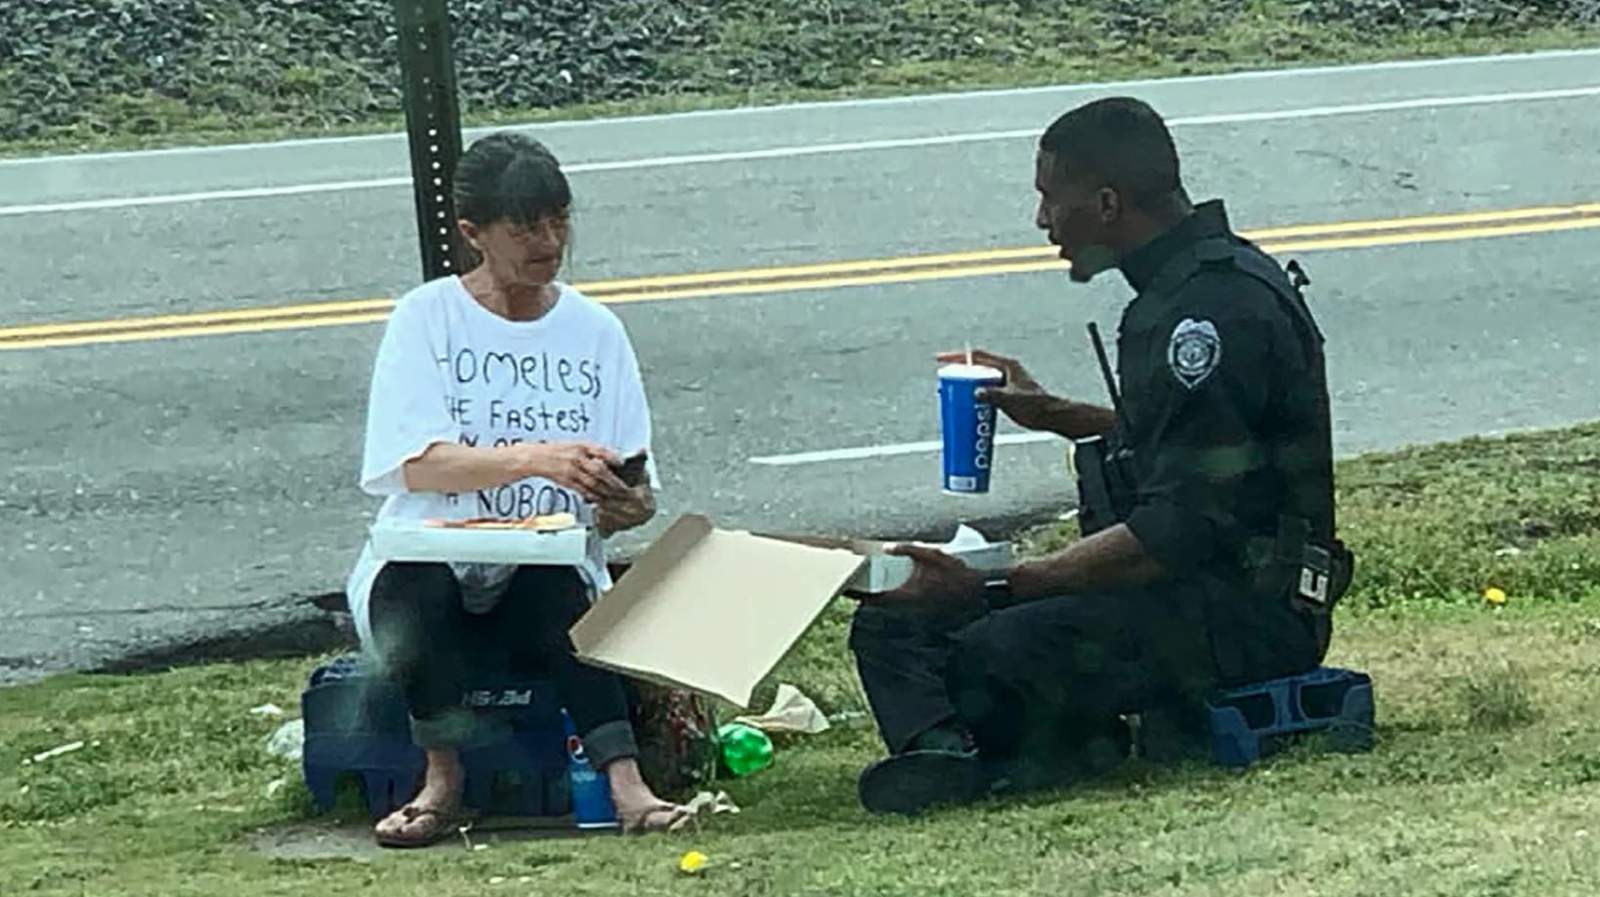 Police officer shares pizza with homeless woman during lunch break